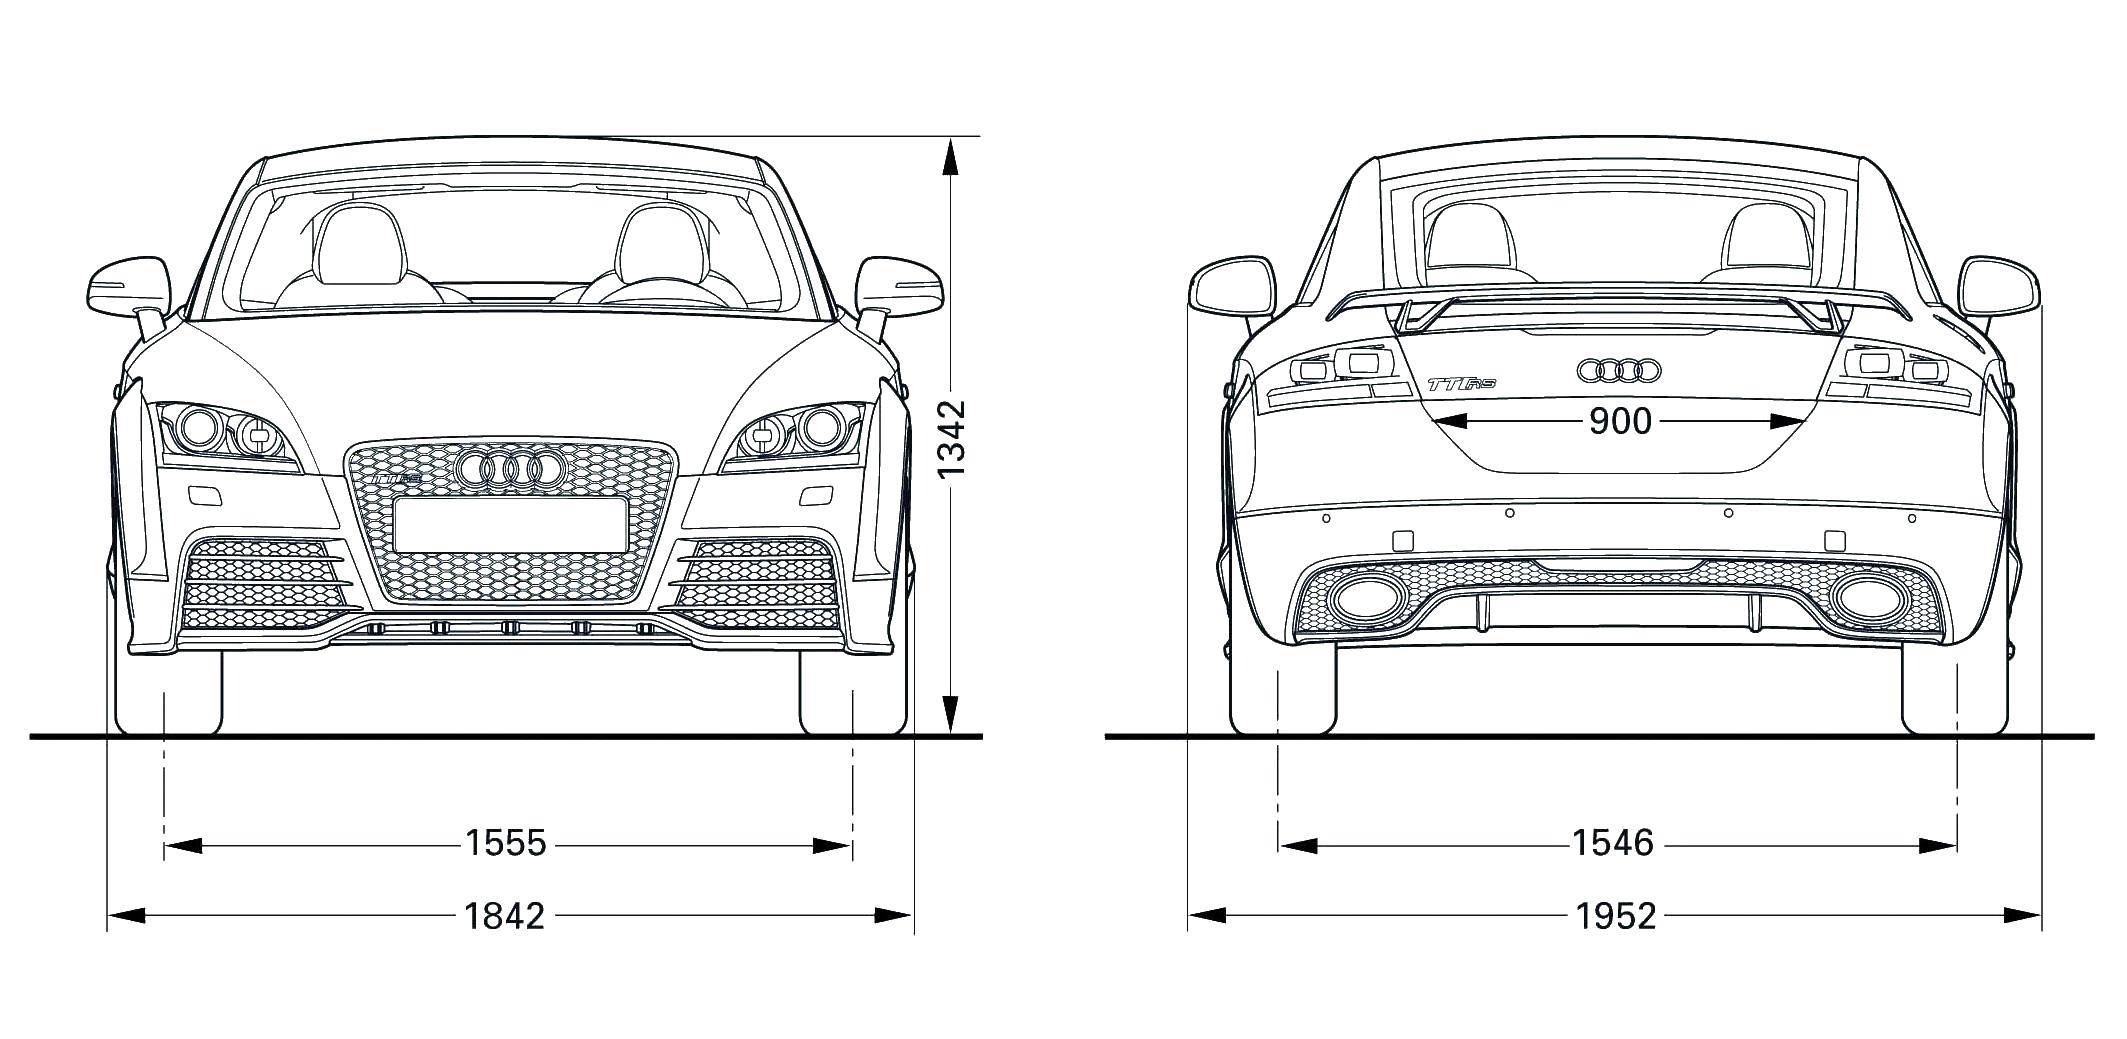 Coloring Dimensions Audi. Category The contours of the machine. Tags:  Audi, car.